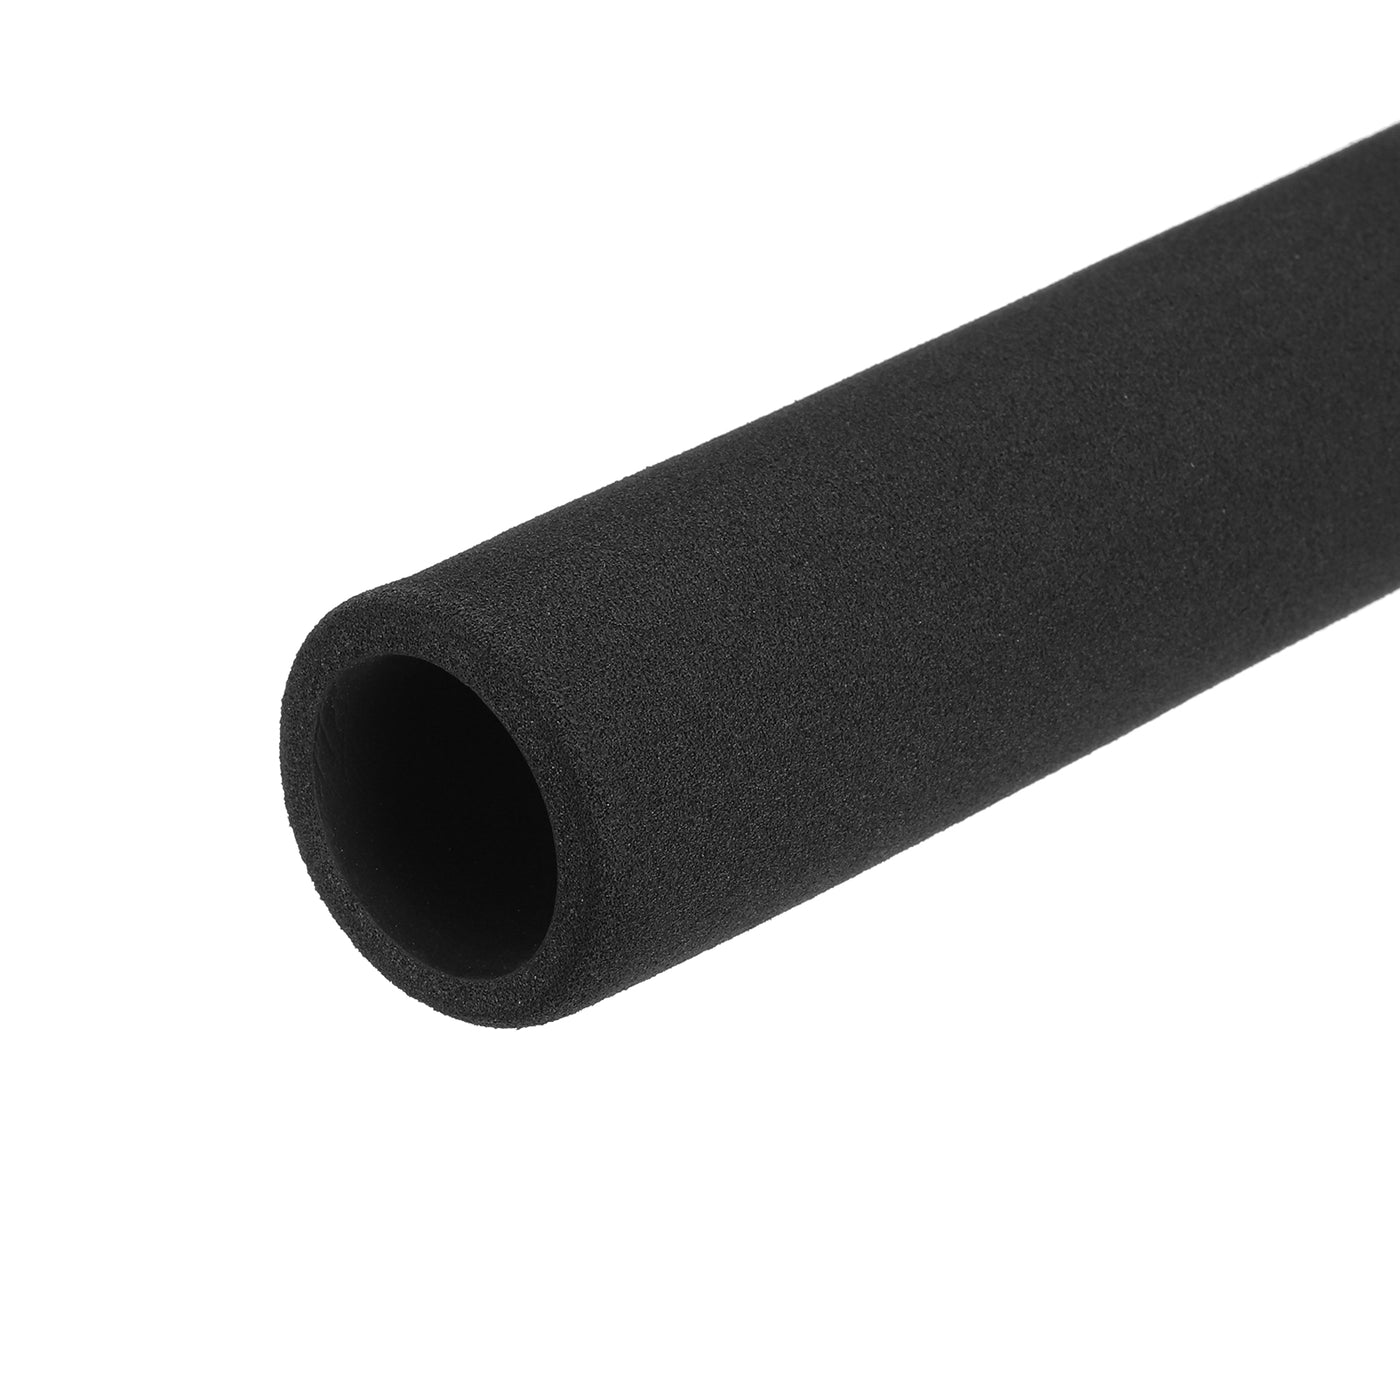 uxcell Uxcell Pipe Insulation Tube Foam Tubing for Handle Grip Support 24mm ID 34mm OD 485mm Heat Preservation Black